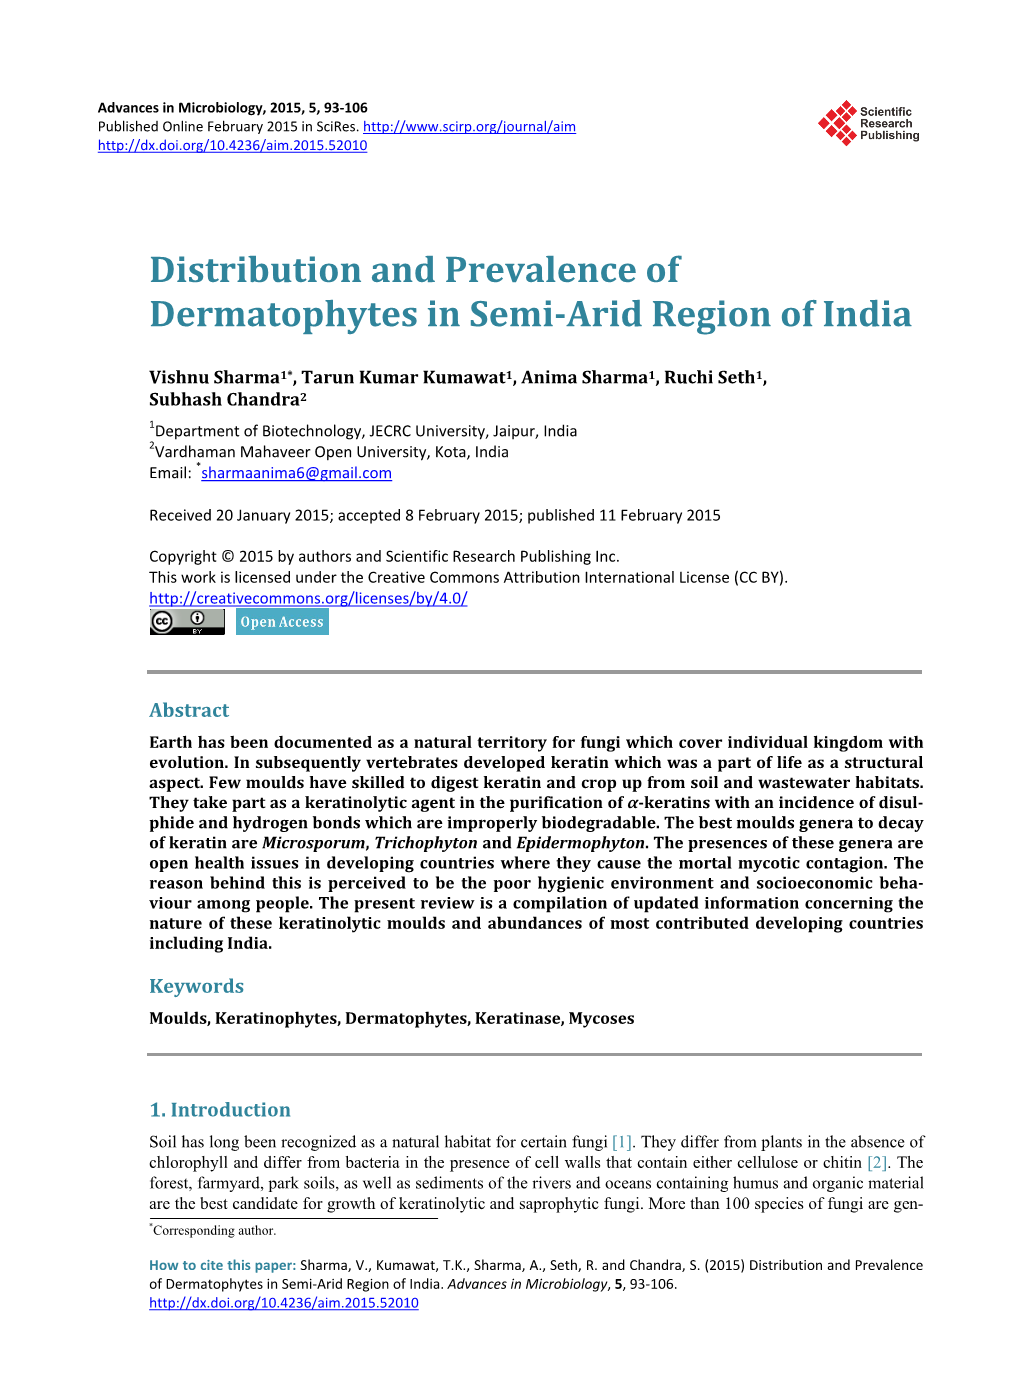 Distribution and Prevalence of Dermatophytes in Semi-Arid Region of India